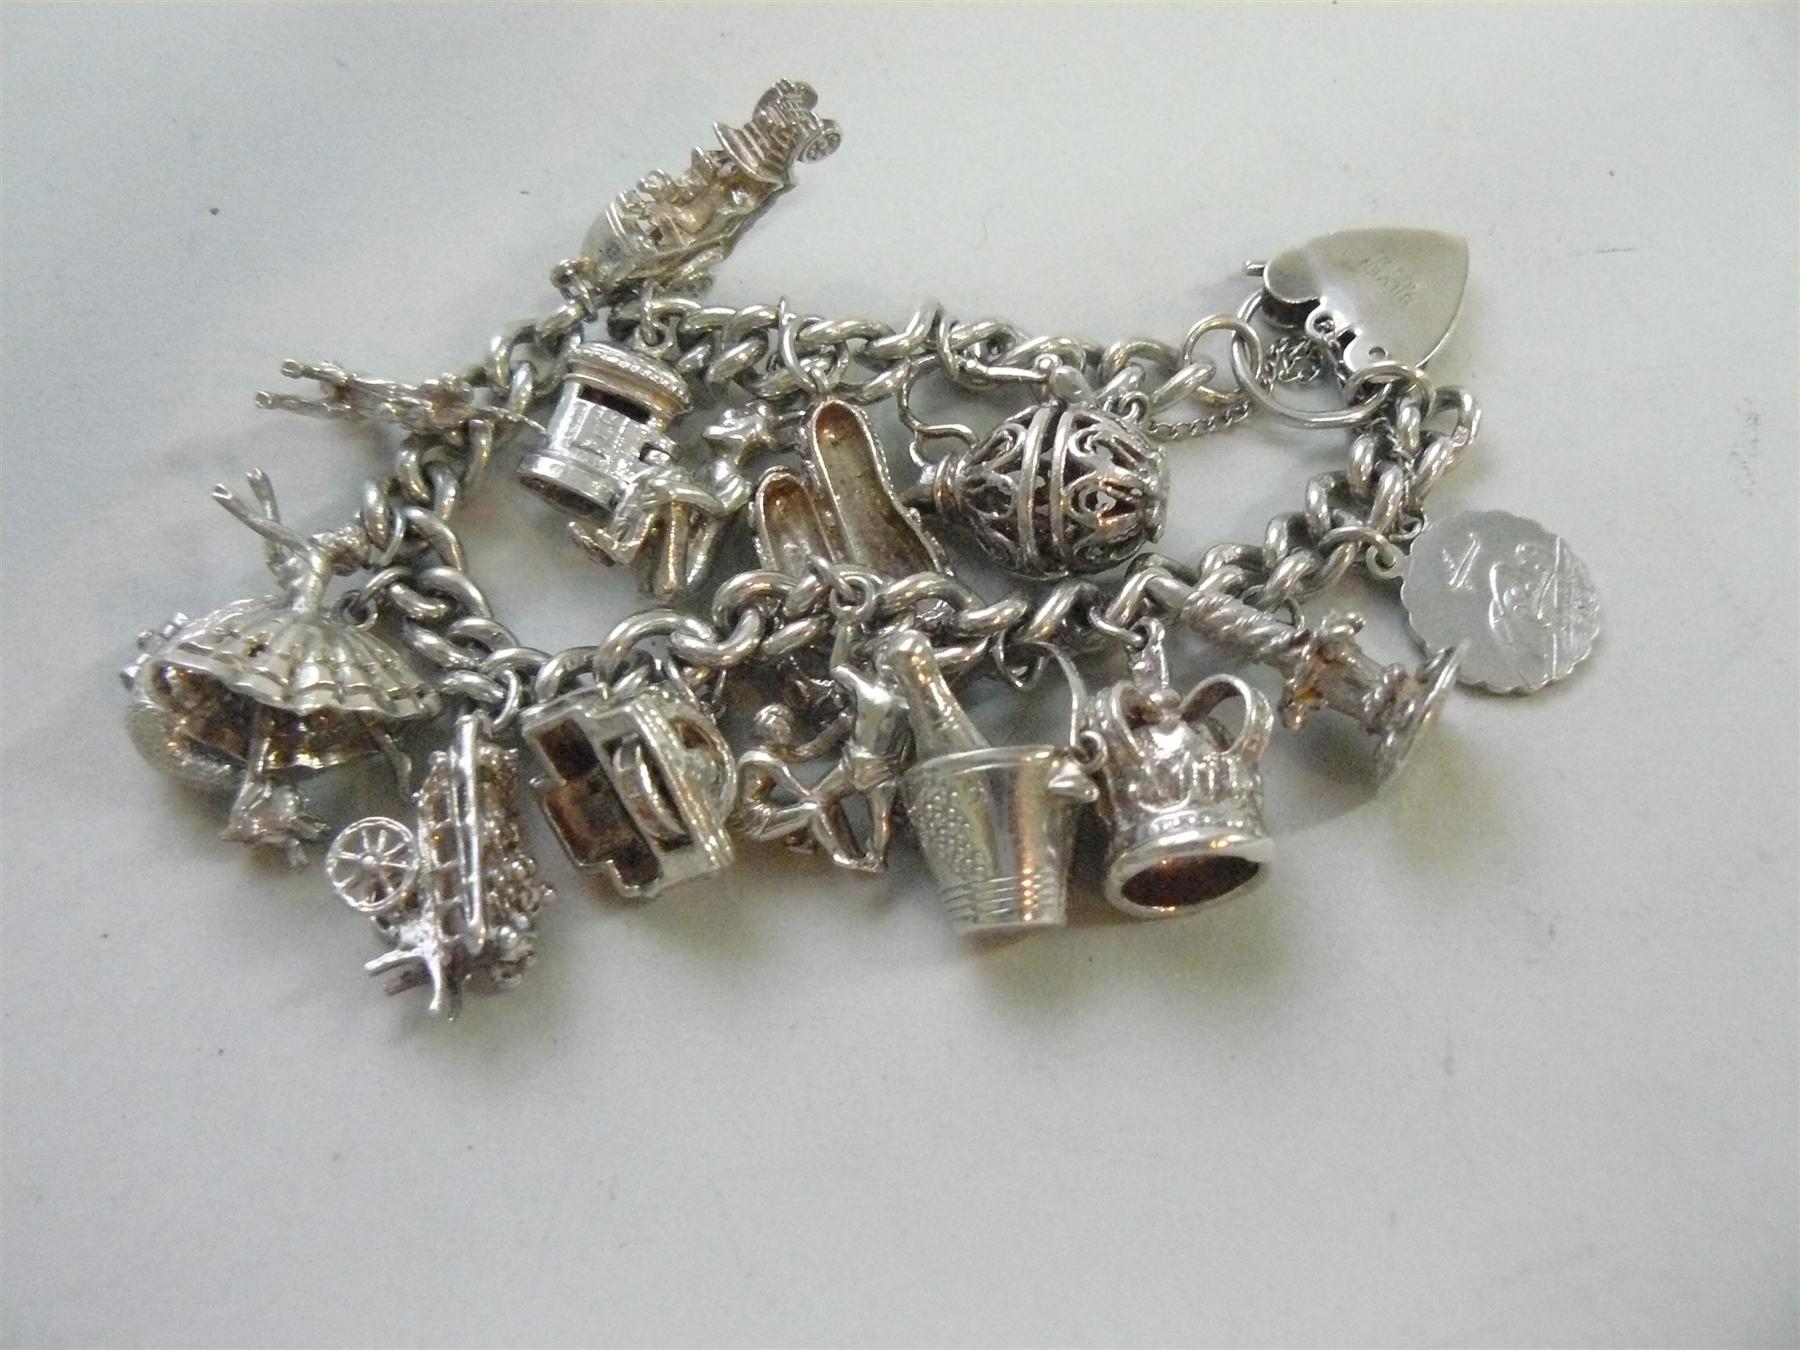 A silver charm bracelet with padlock clasp, with sixteen charms attached, the bracelet and one charm